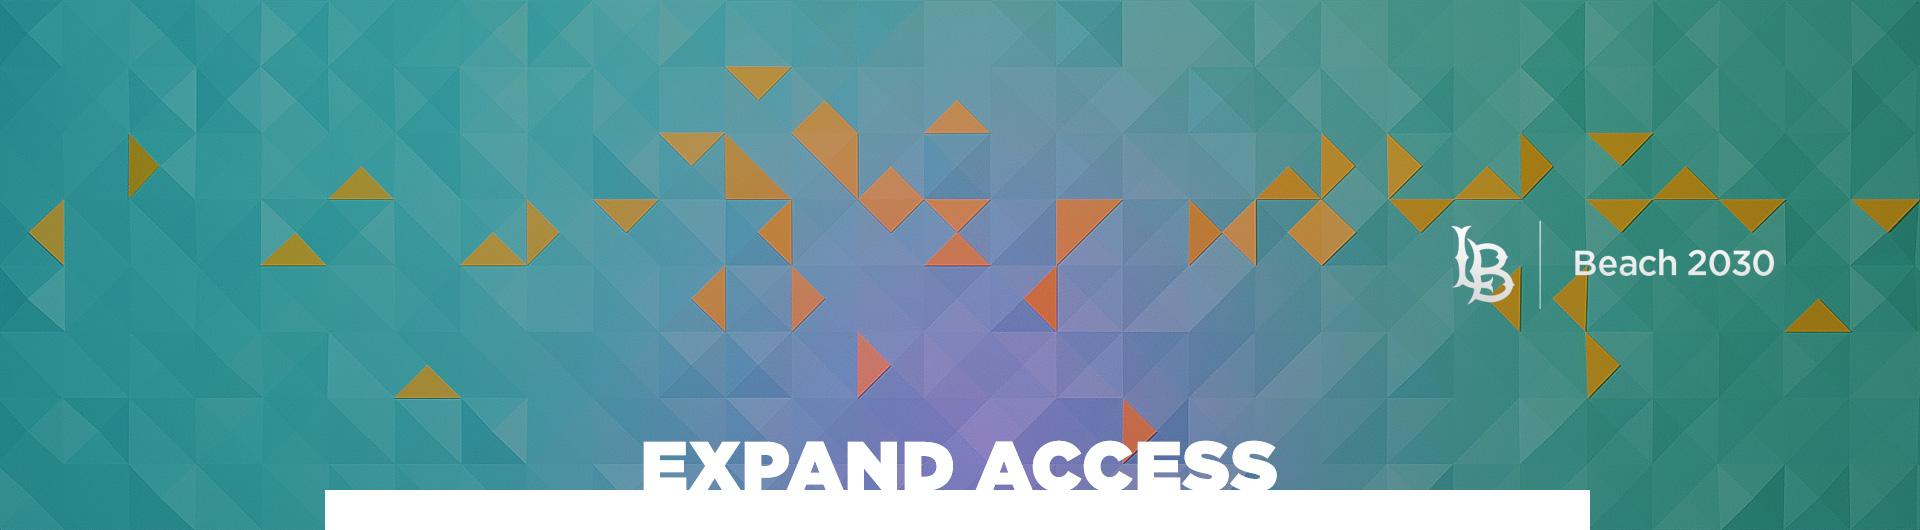 Expand Access